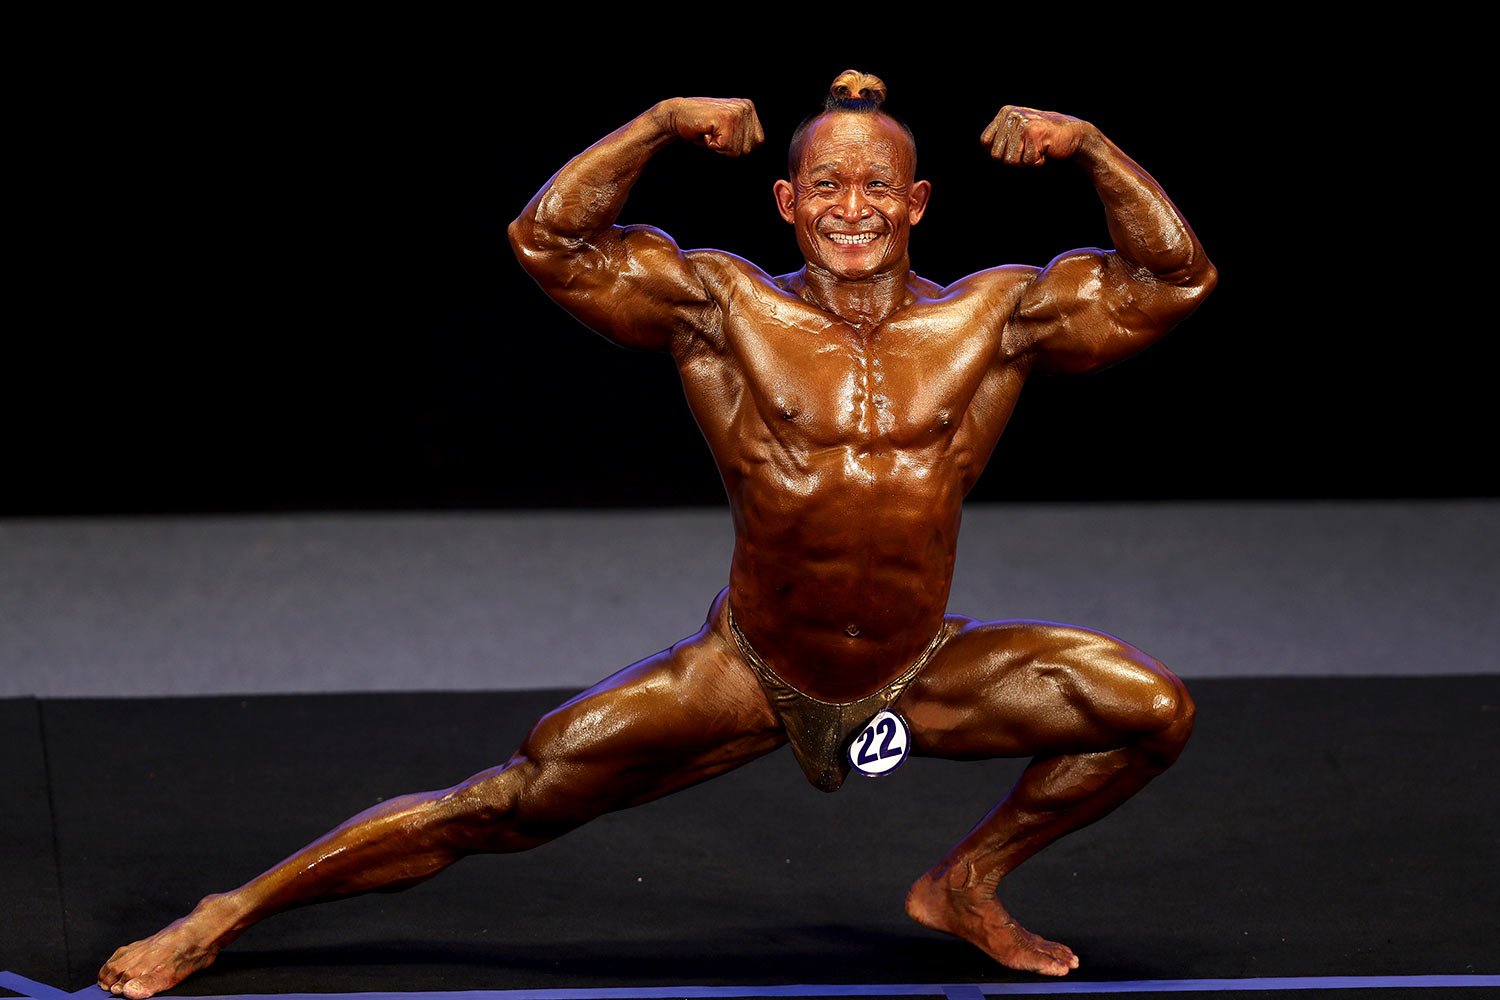  Mg Mg Myint of Myanmar compete in Men's Bodybuilding 65kg during the 31st Southeast Asian Games (SEA Games 31) in Hanoi, Vietnam Friday, May 13, 2022.  (AP Photo/Minh Hoang) 